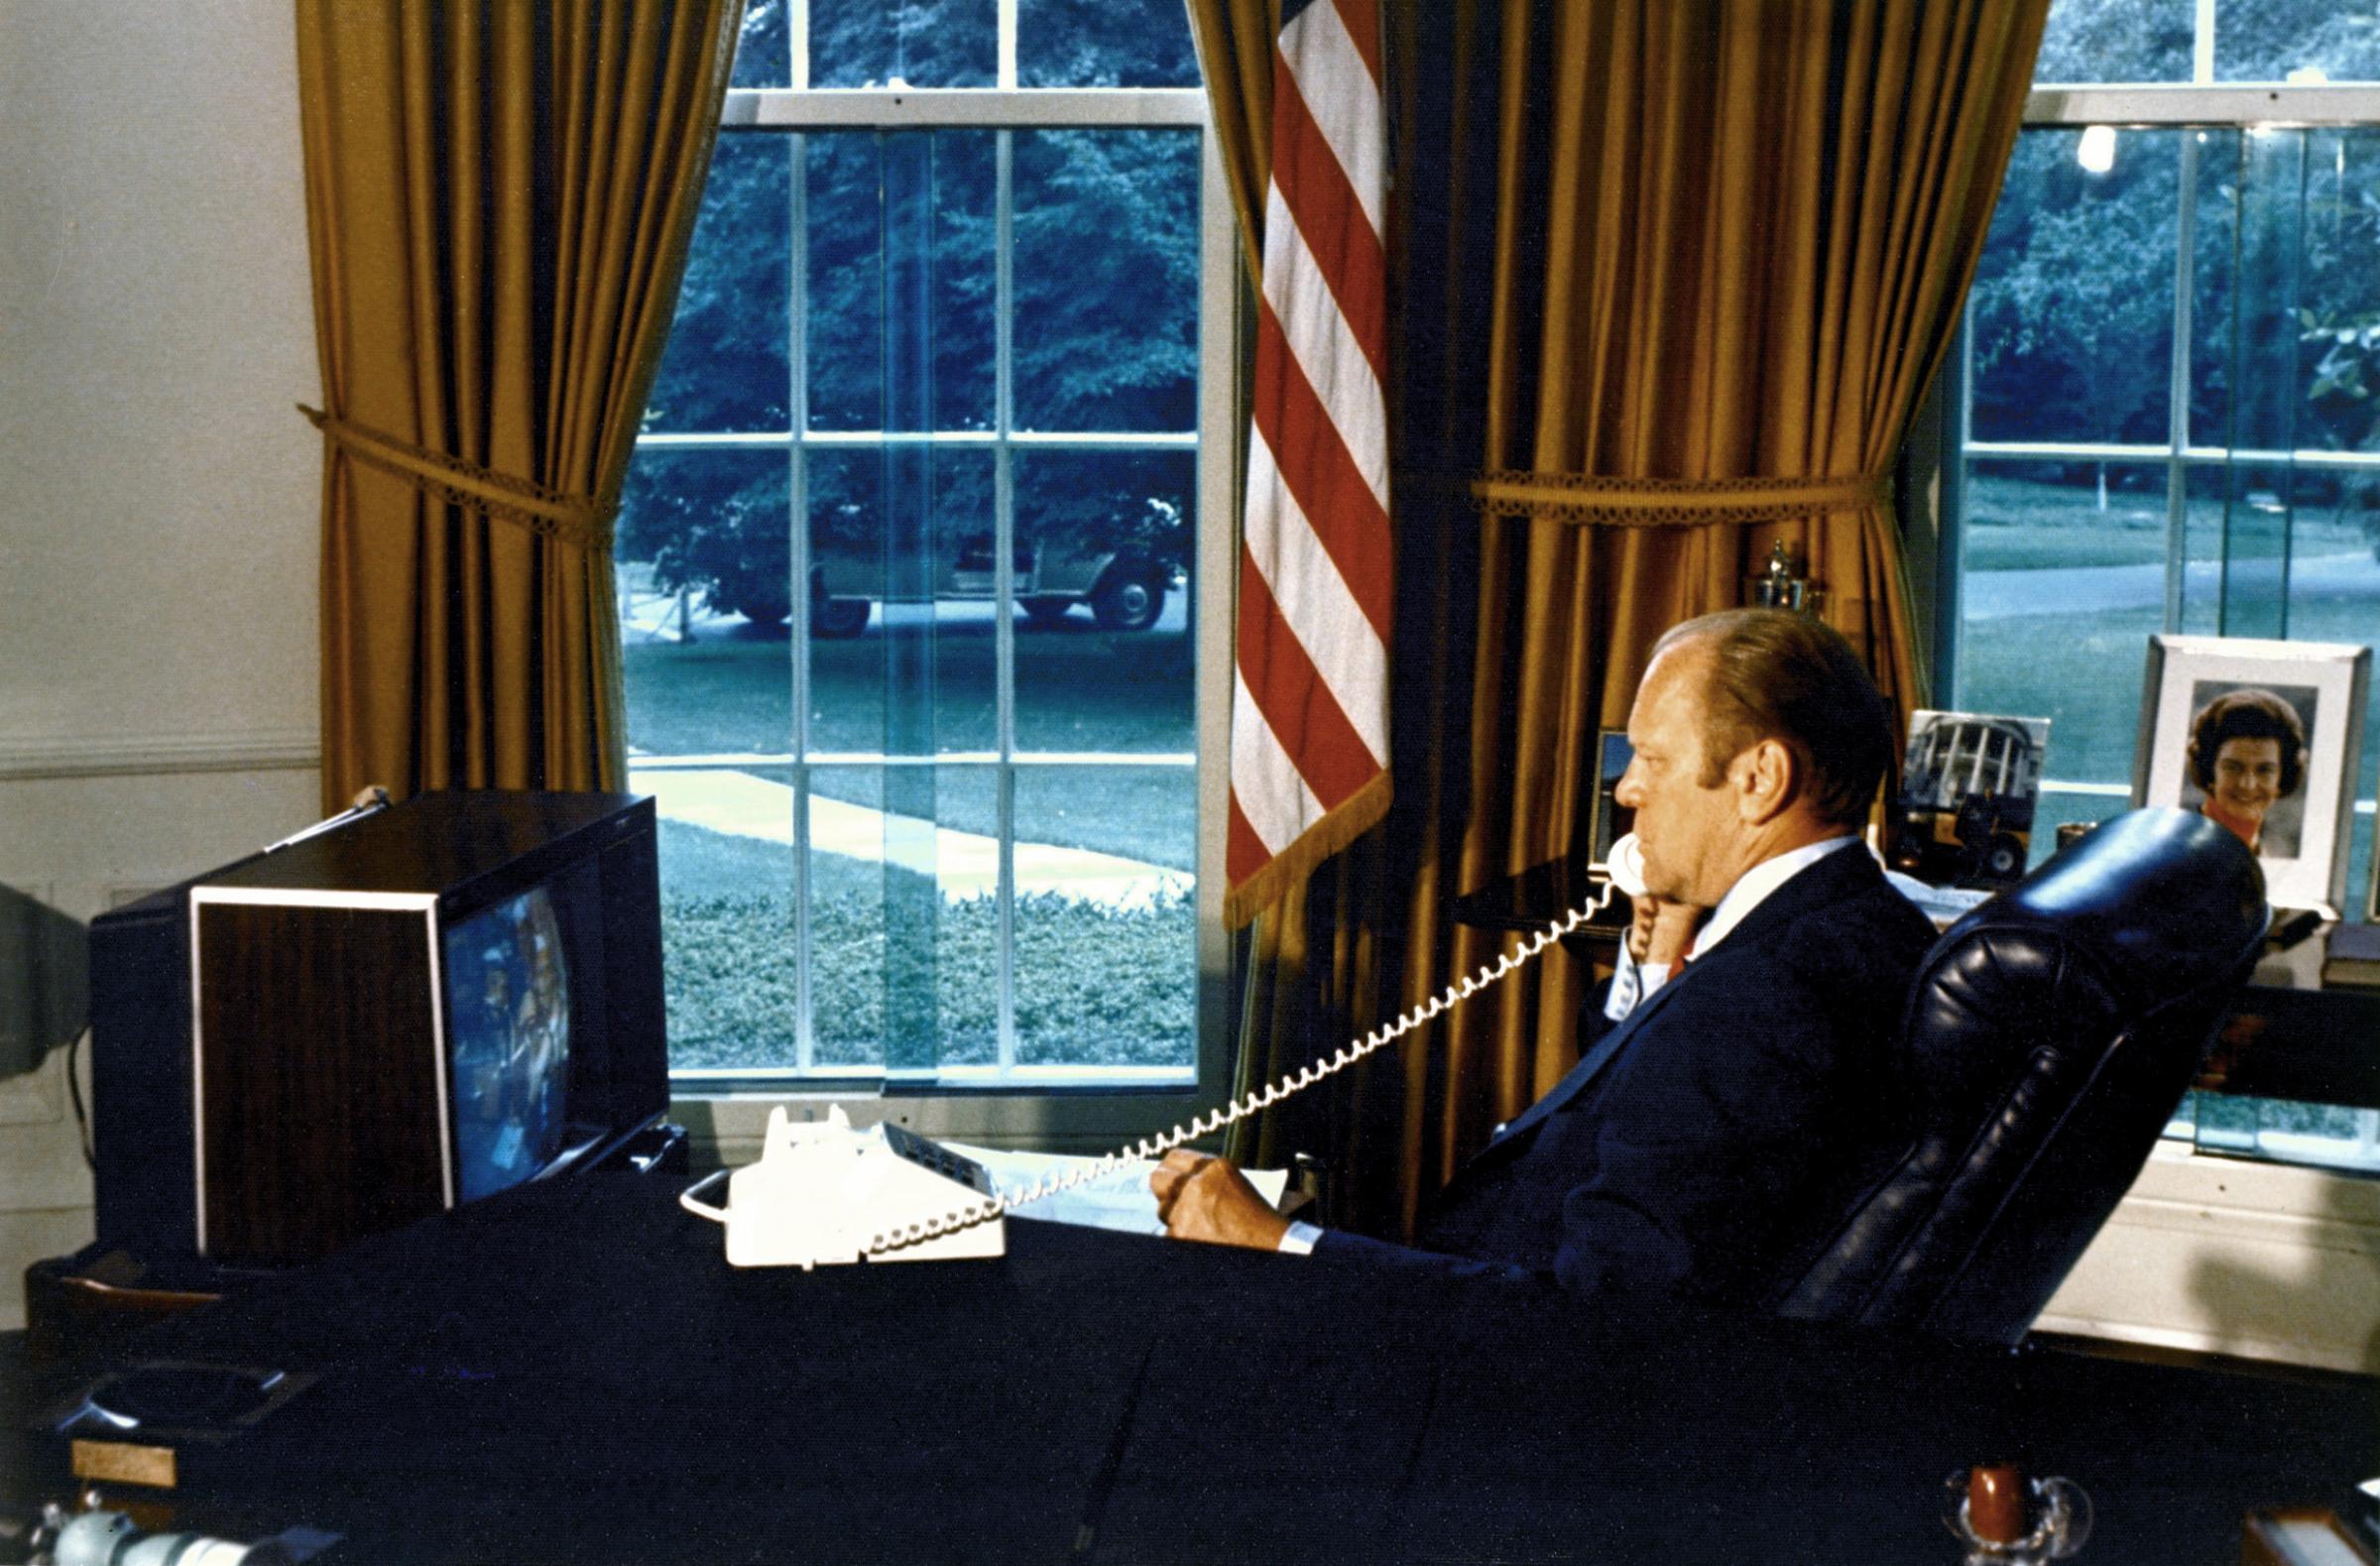 President Gerald R. Ford watches crewmen Tom Stafford, Donald Slayton and Valeriy Kubasov on a television as he talks to them by phone while they orbited the Earth on July 18, 1975. The American Apollo spacecraft and Soviet Soyuz spacecraft were docked.